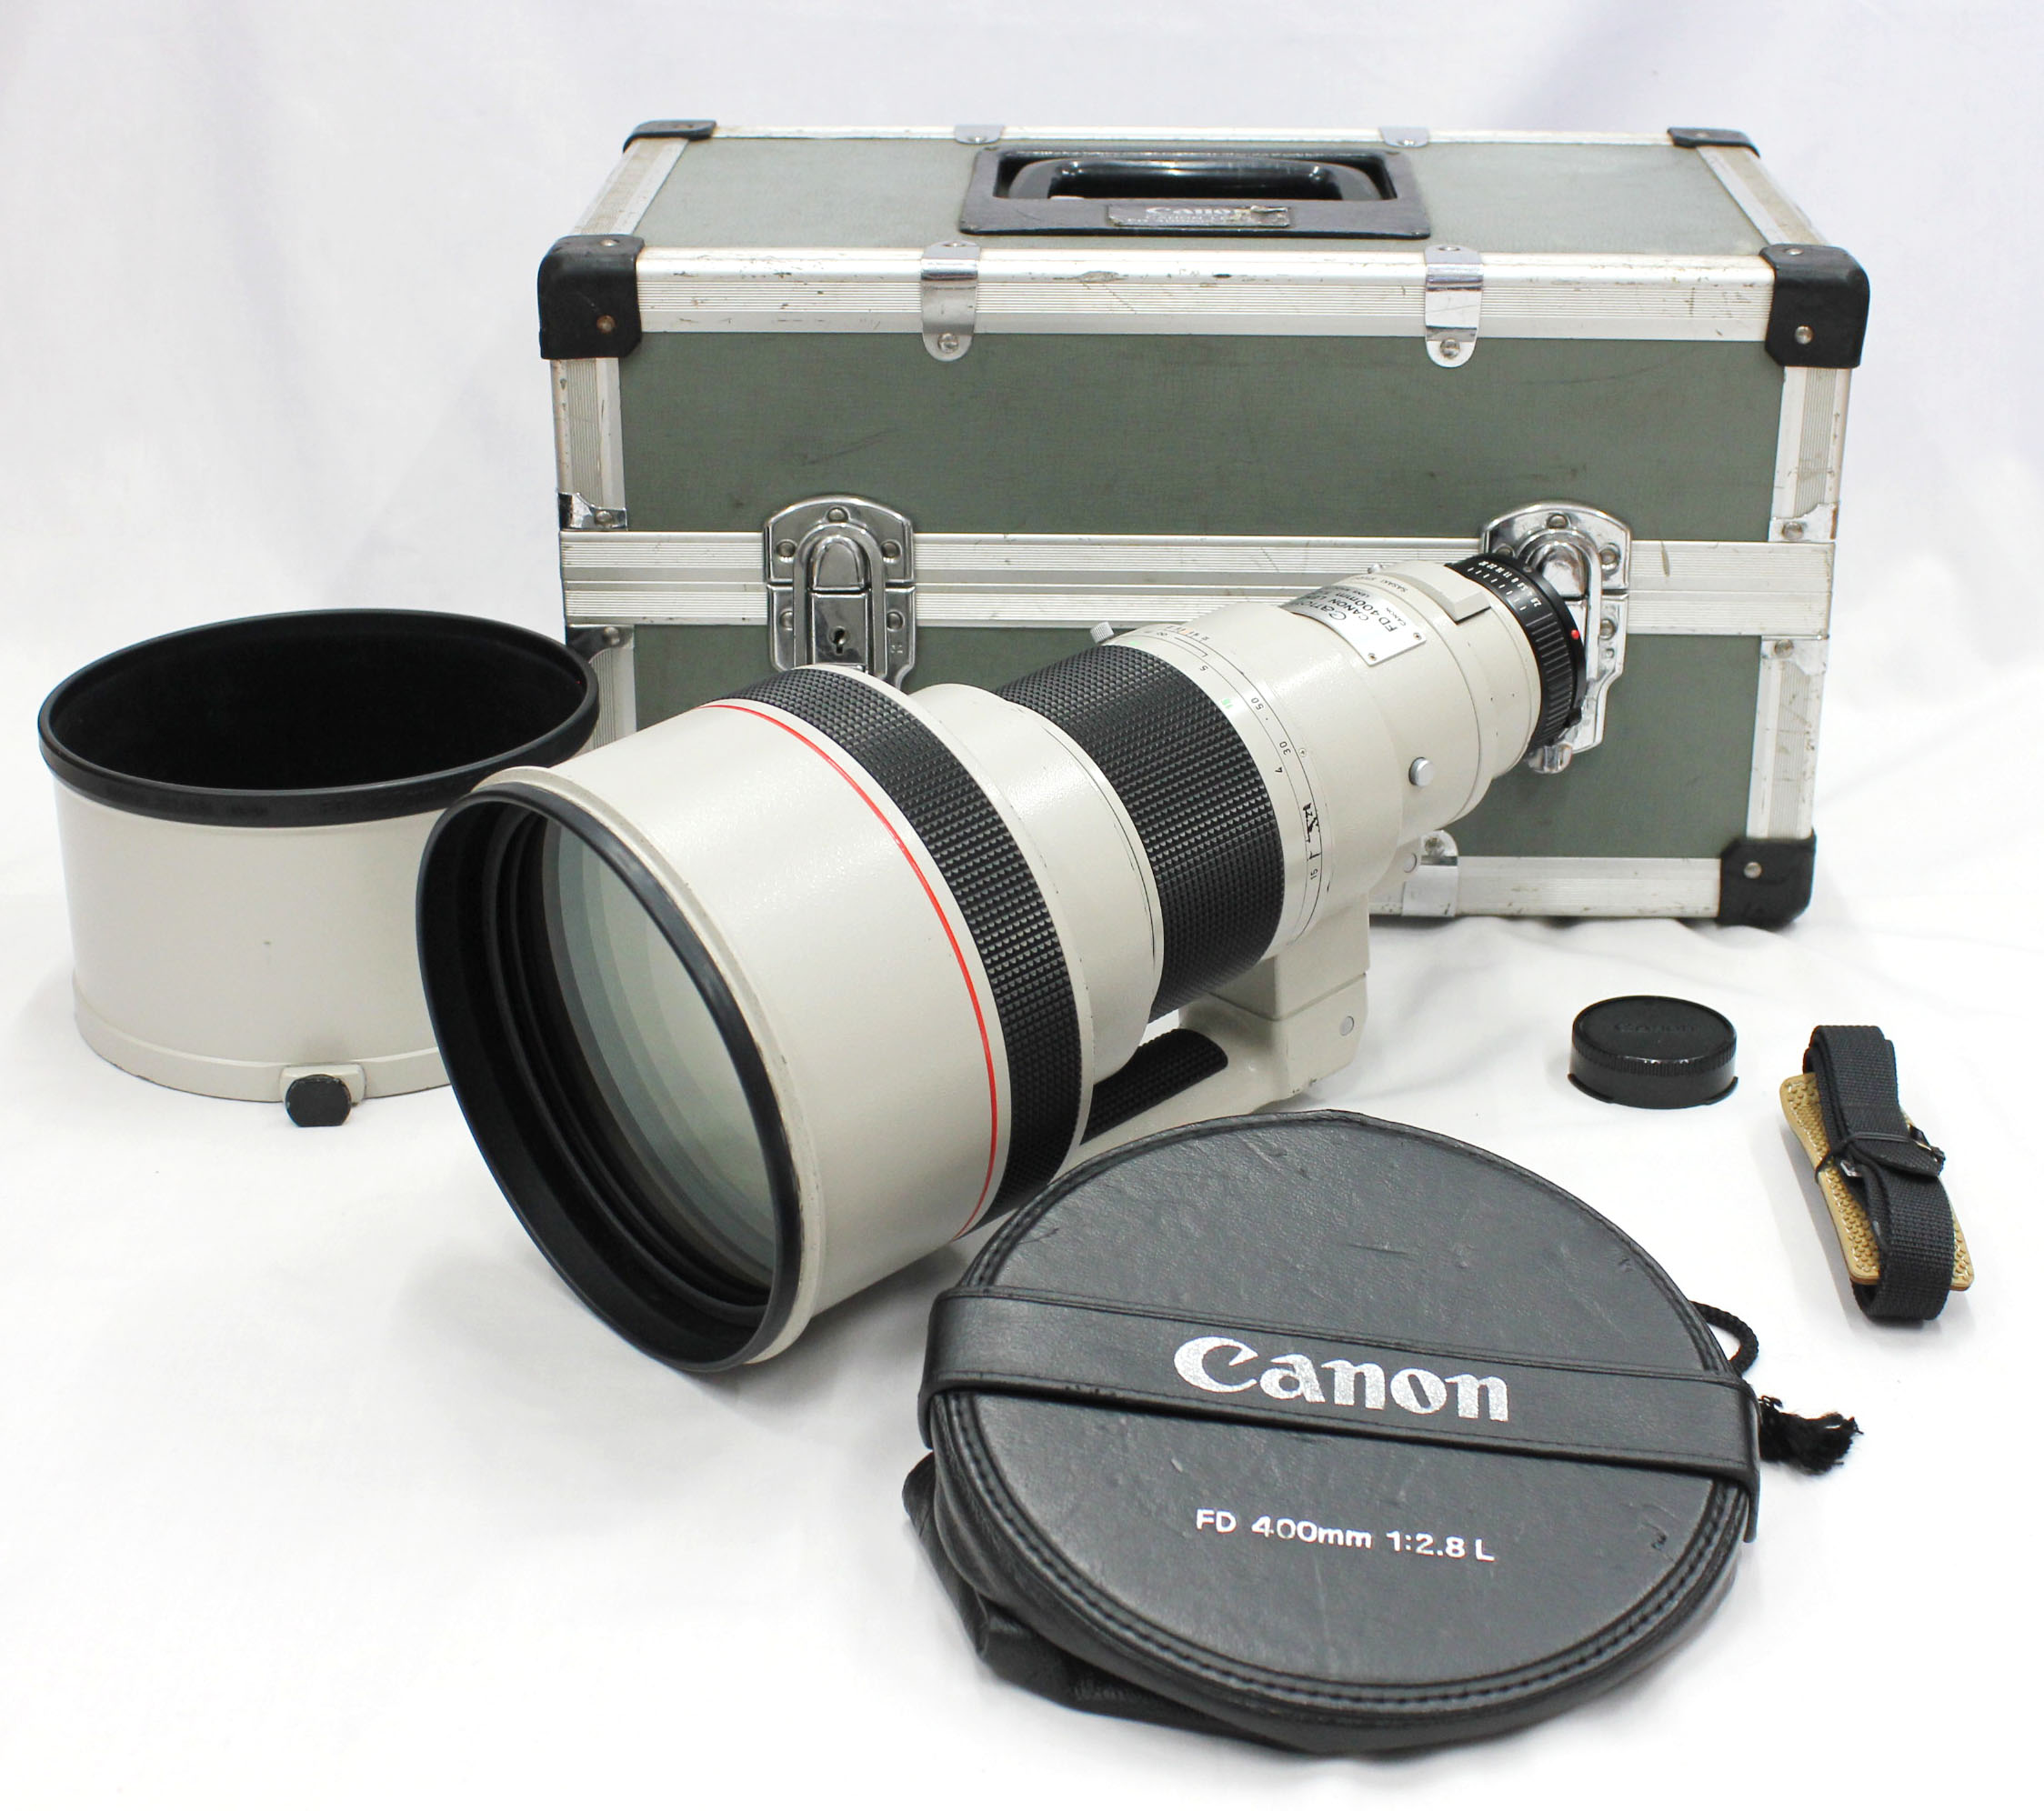 Japan Used Camera Shop | [Excellent+++++] Canon New FD NFD 400mm F/2.8 L MF Telephoto Lens from Japan